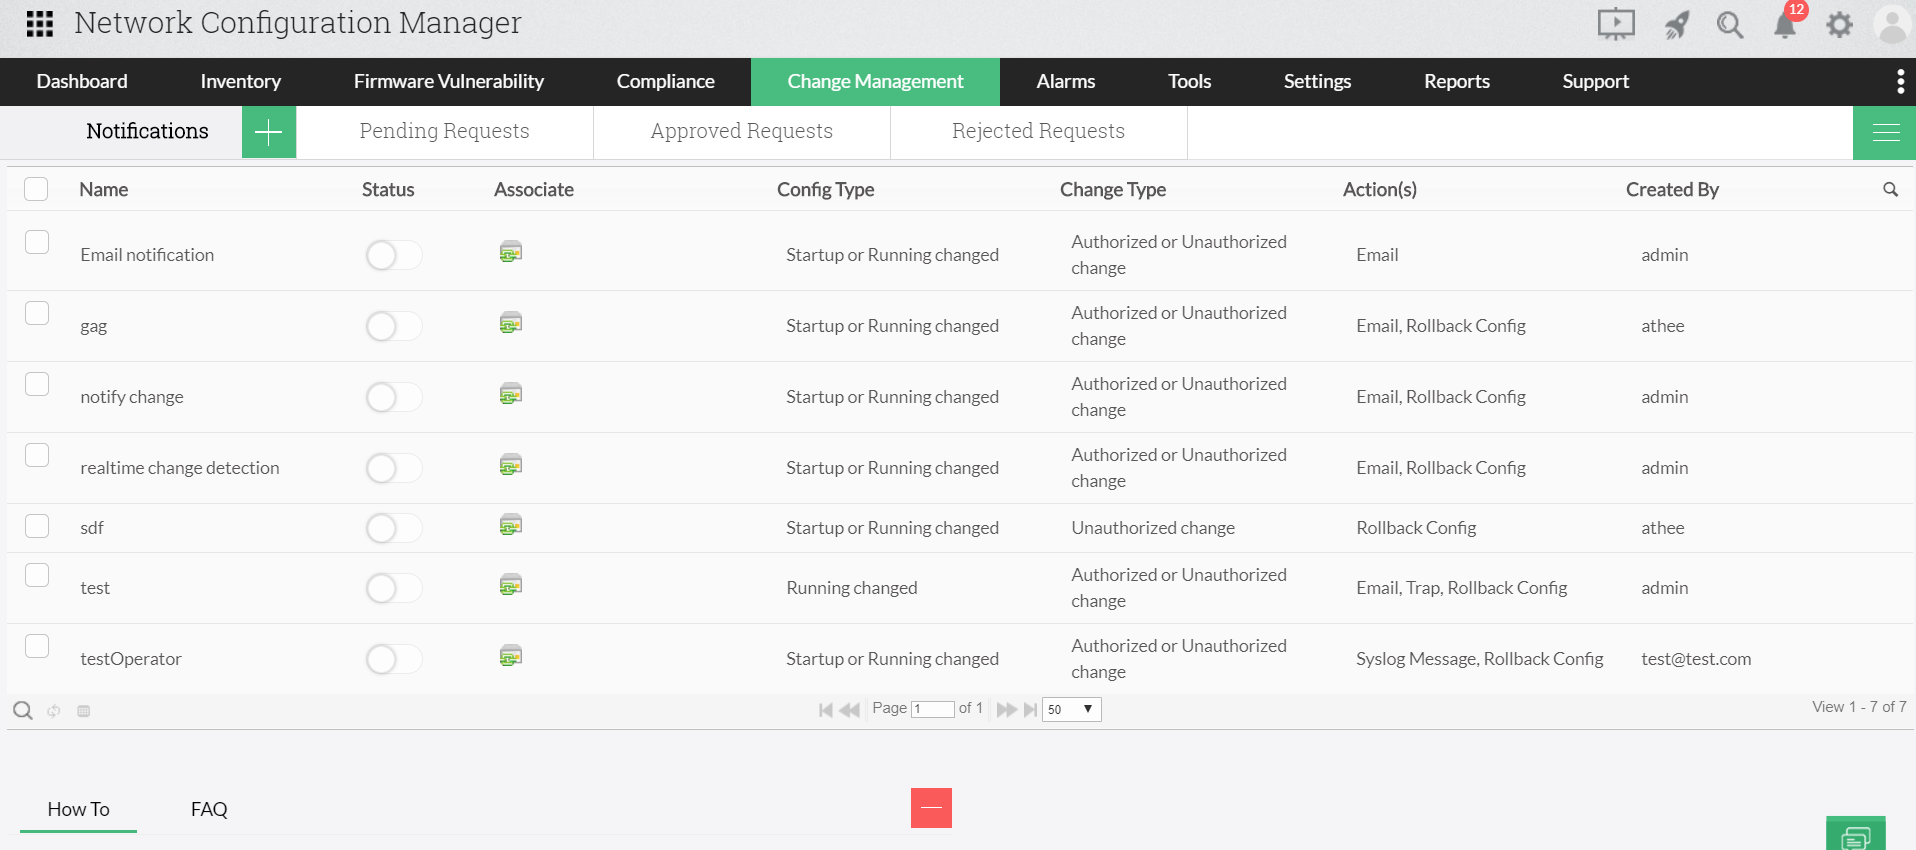 Manage Siemens configuration changes - ManageEngine Network Configuration Manager